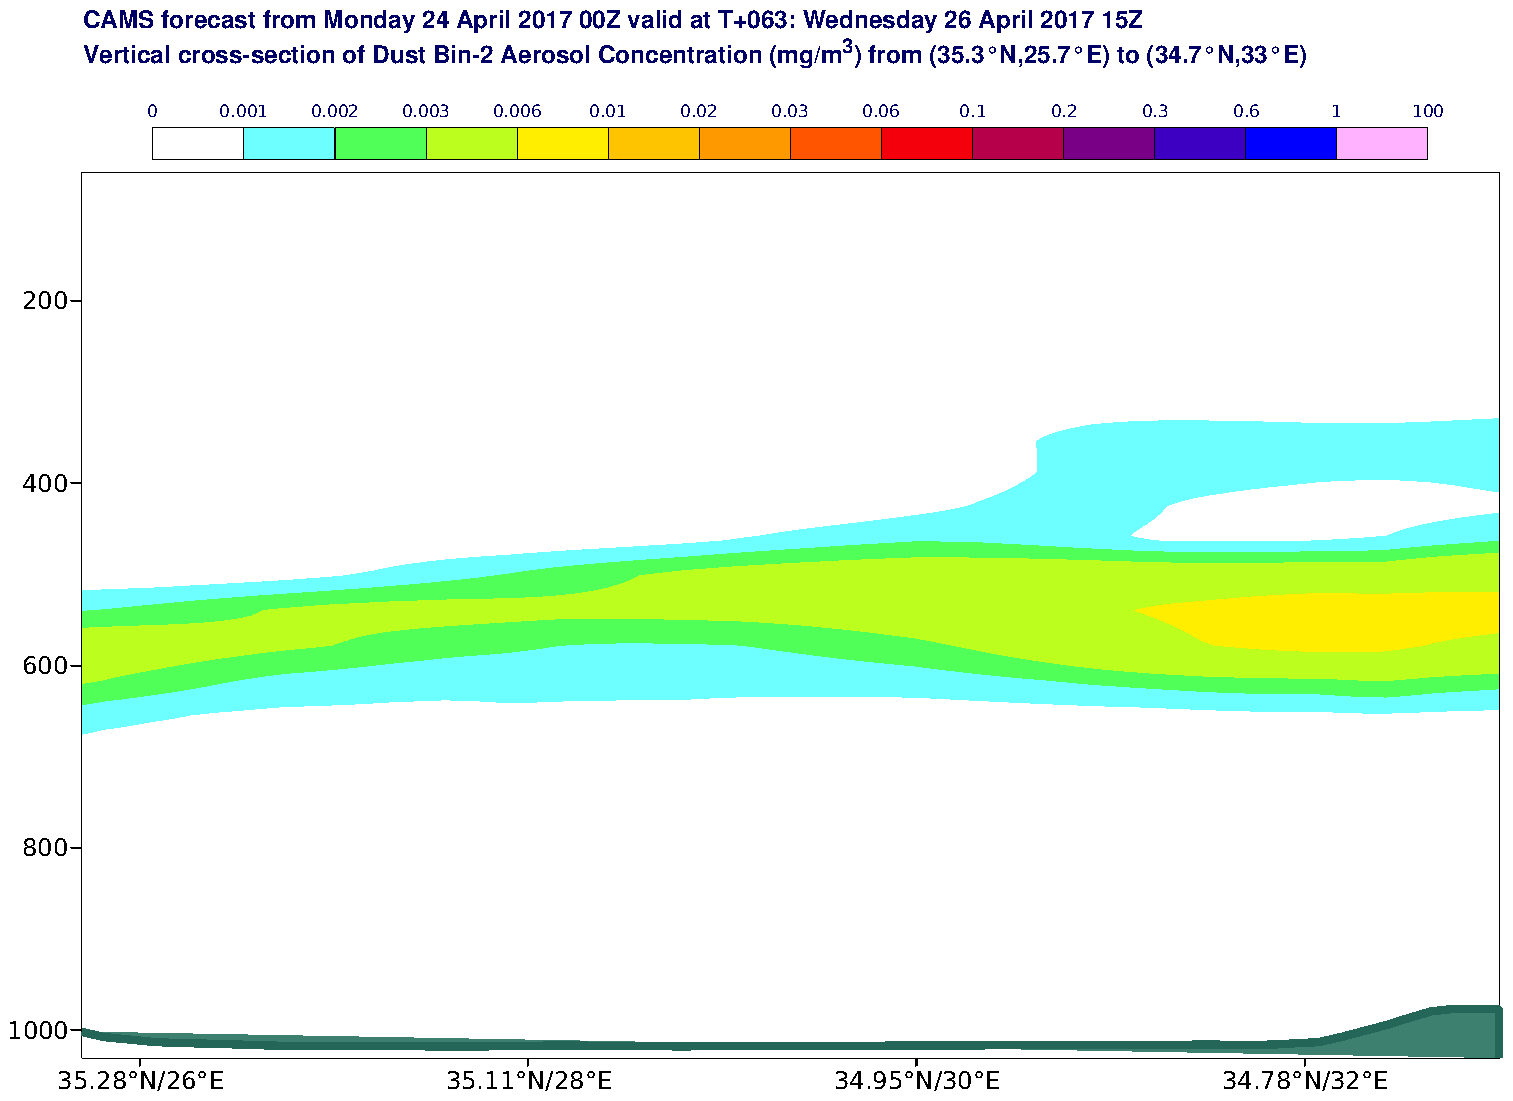 Vertical cross-section of Dust Bin-2 Aerosol Concentration (mg/m3) valid at T63 - 2017-04-26 15:00